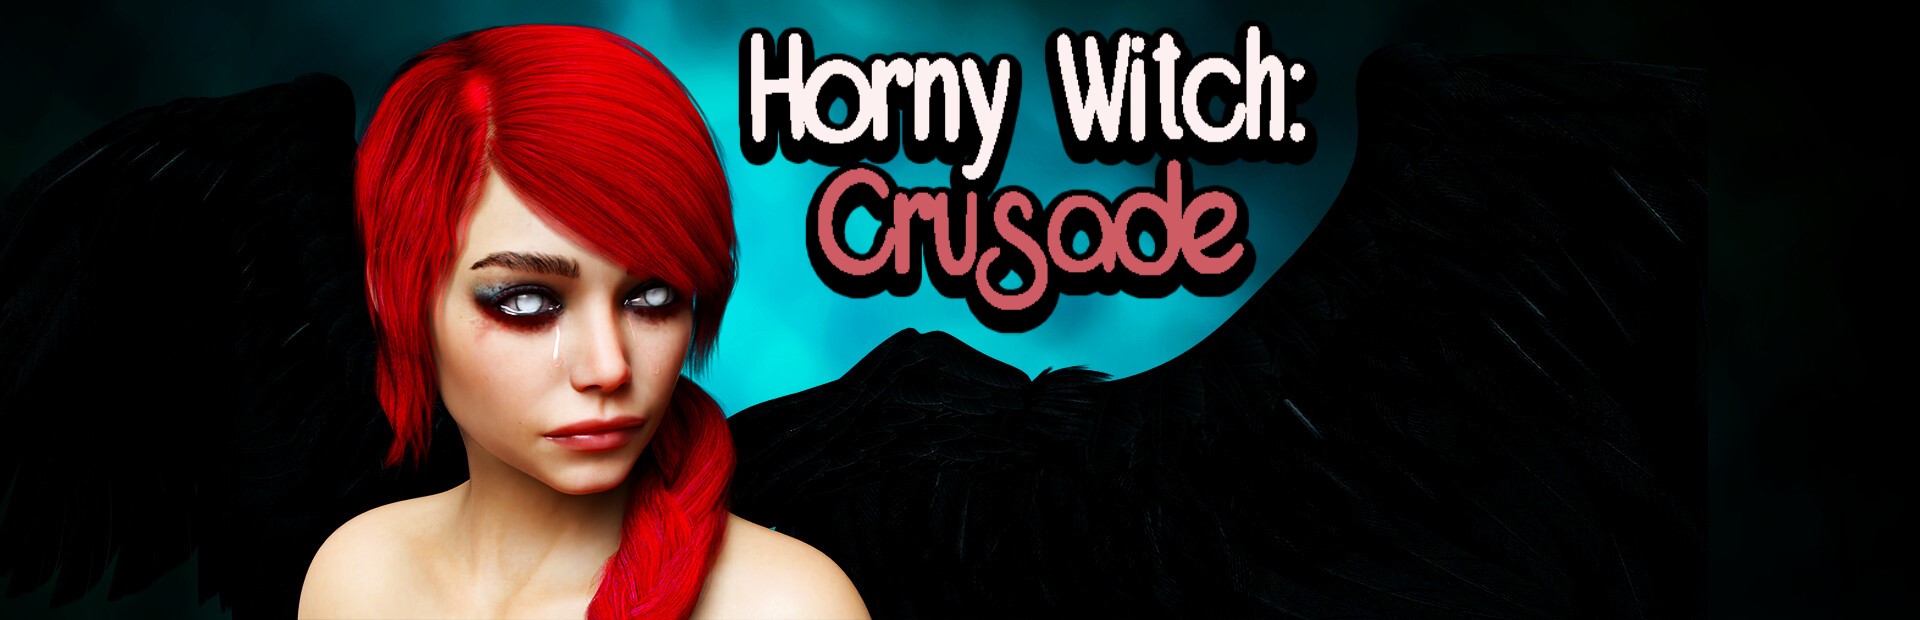 Horny Witch: Crusade poster